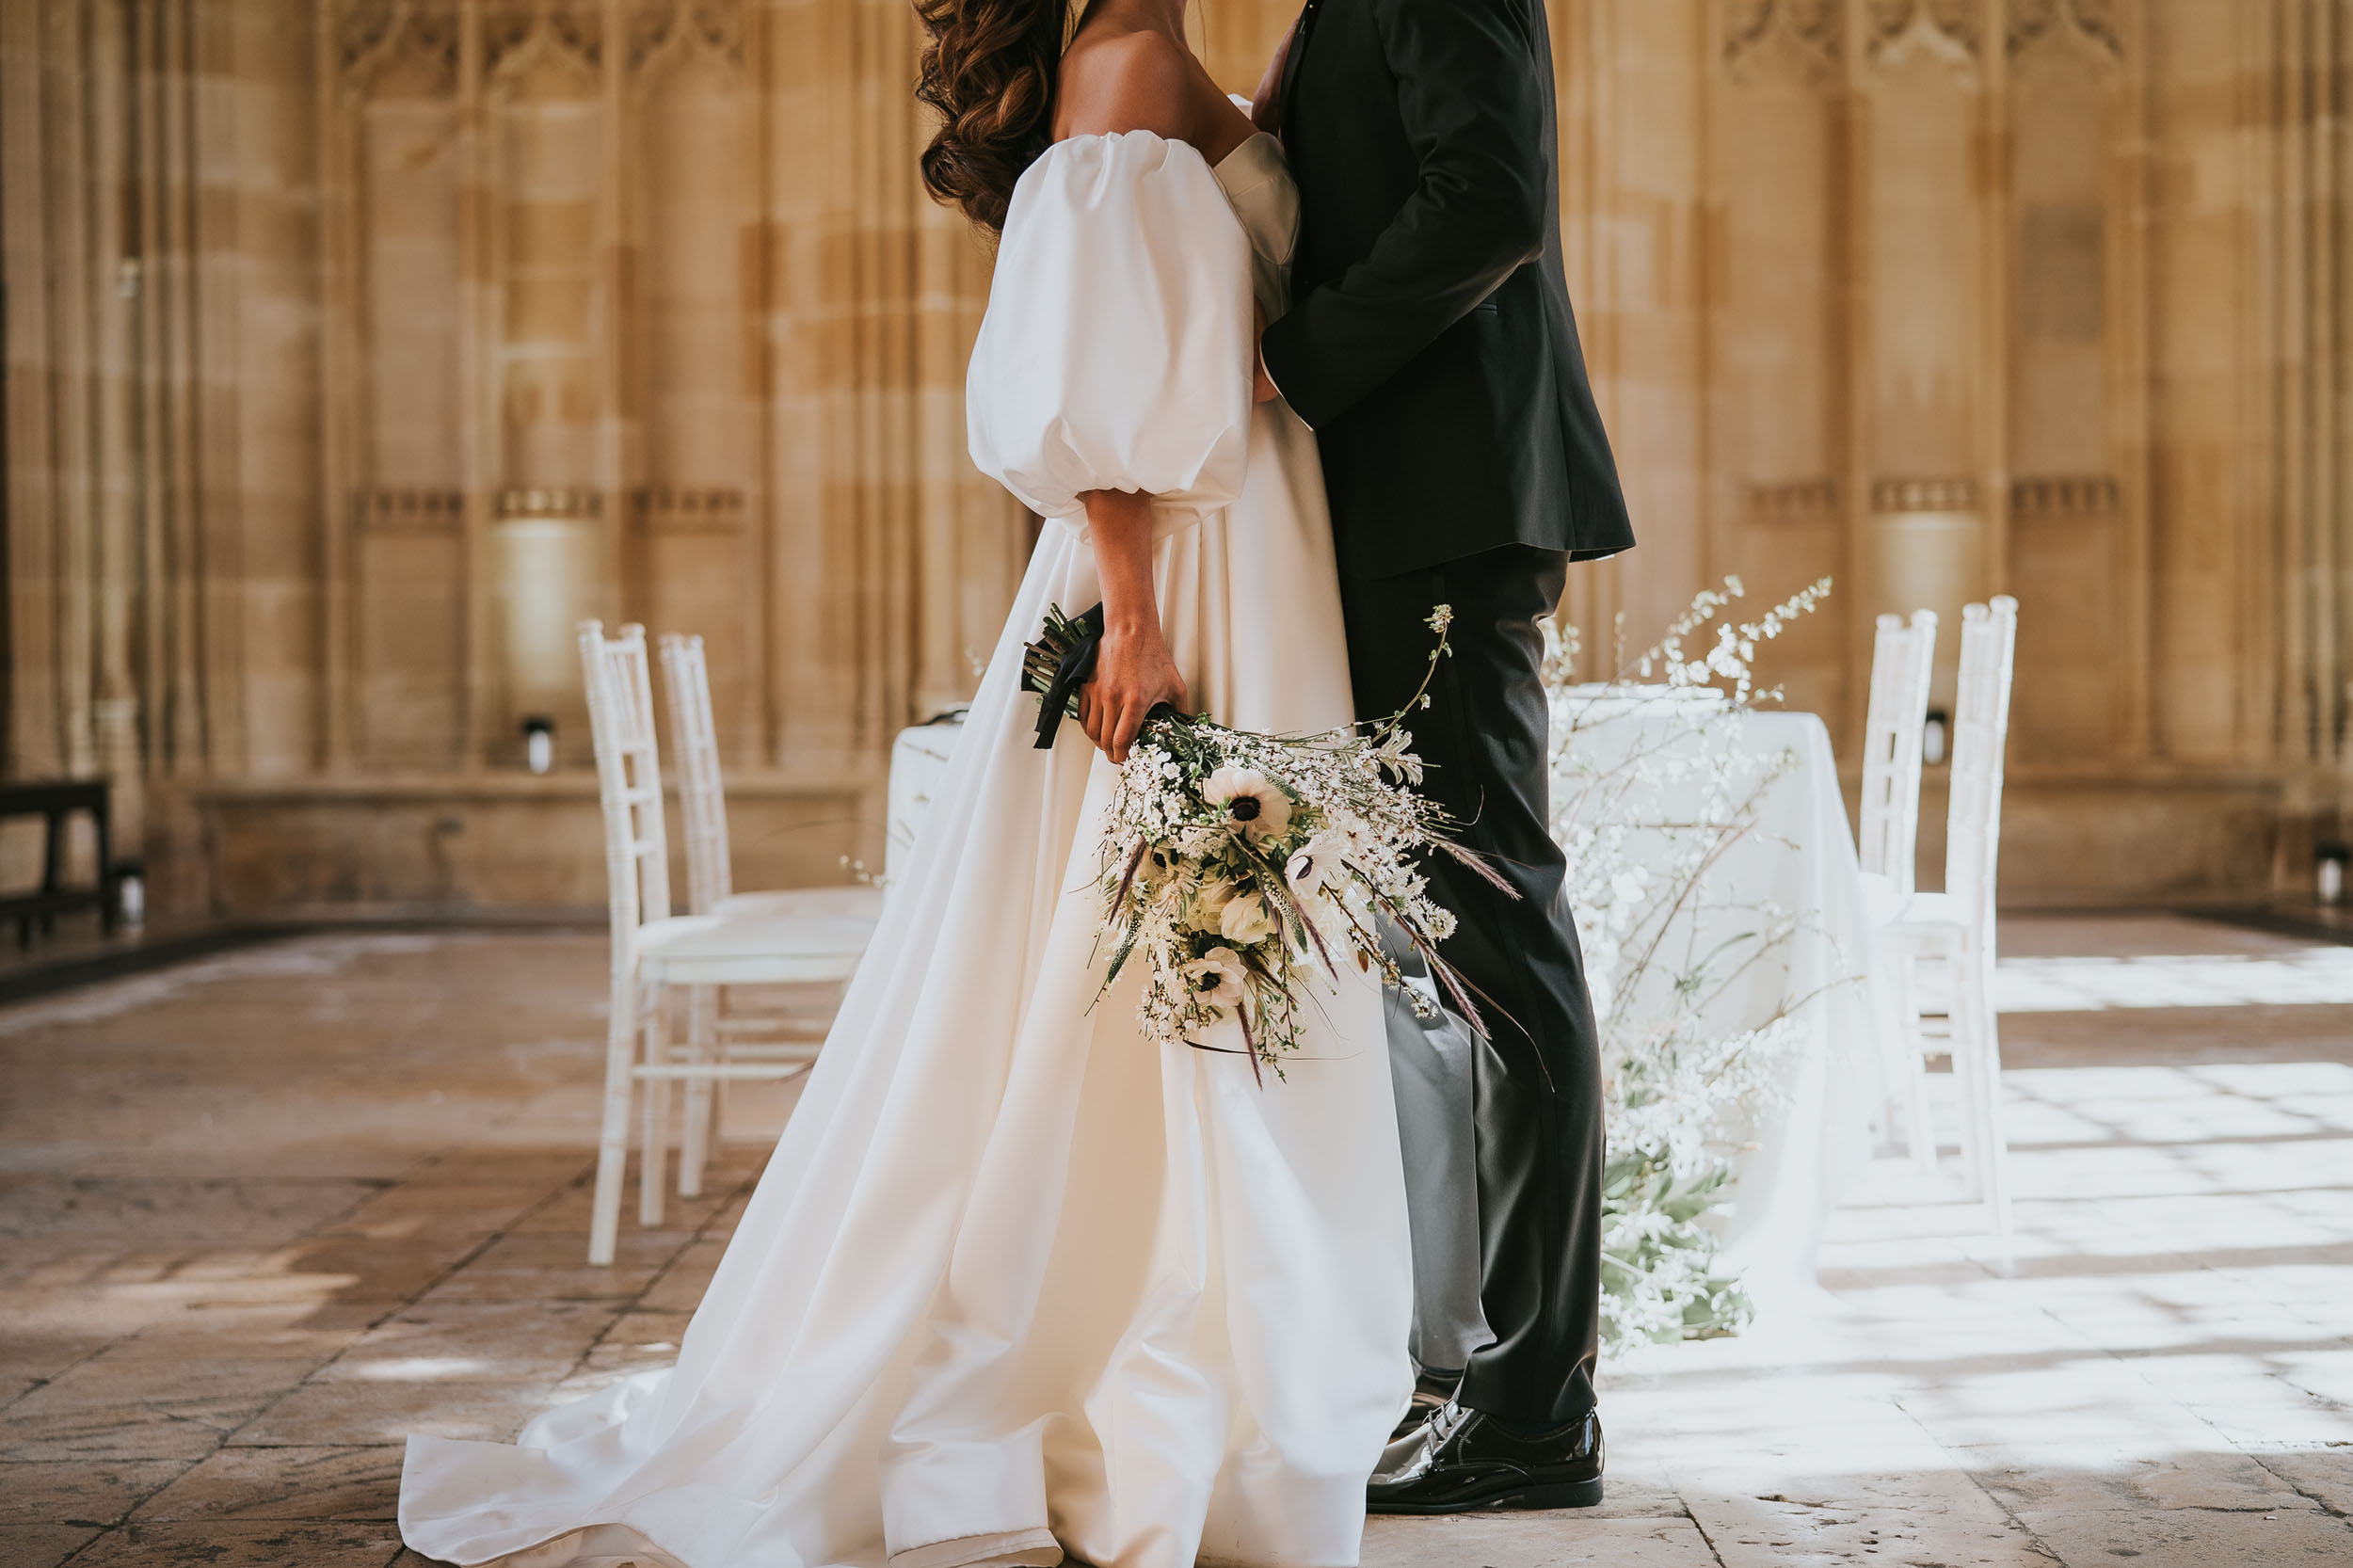 Bodleian Library Wedding Showcase | Visit the Bodleian Libraries